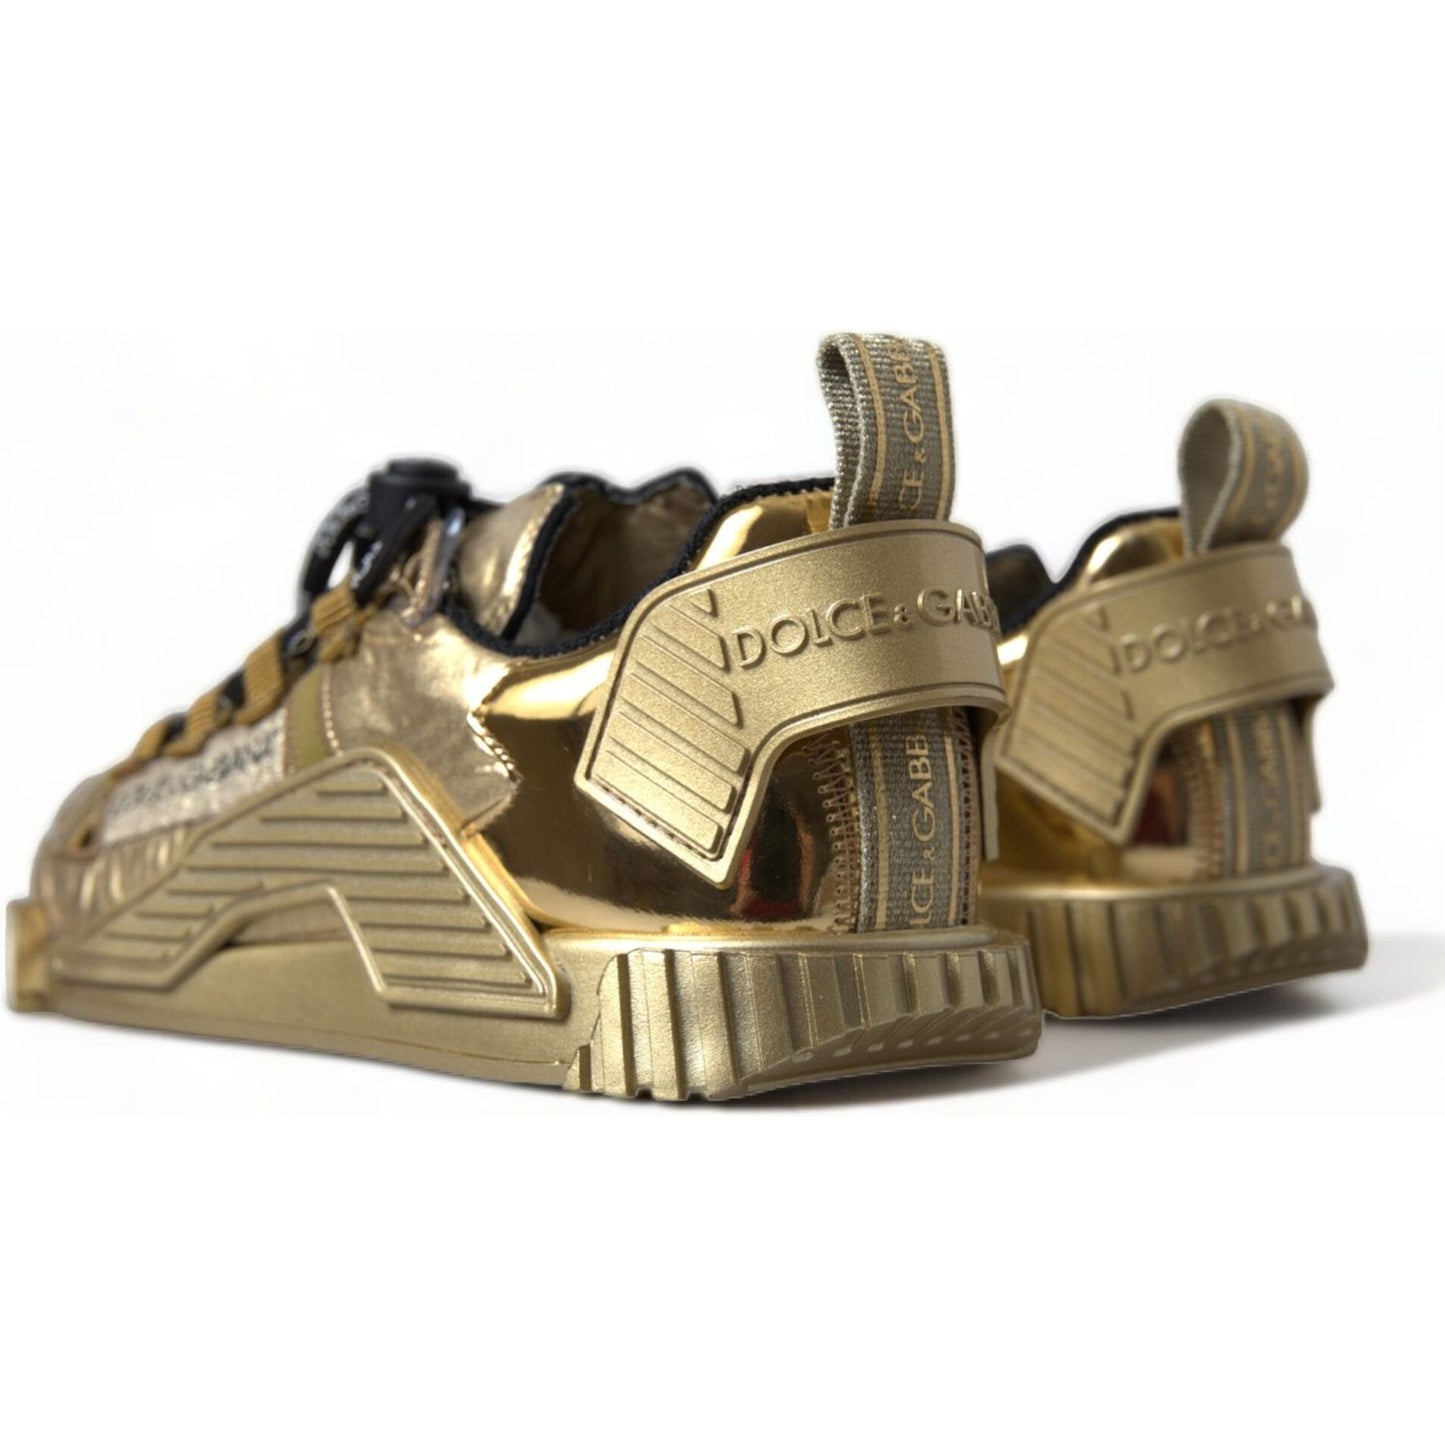 Dolce & Gabbana Gleaming Gold-Toned Luxury Sneakers metallic-gold-ns1-low-top-sneakers-shoes